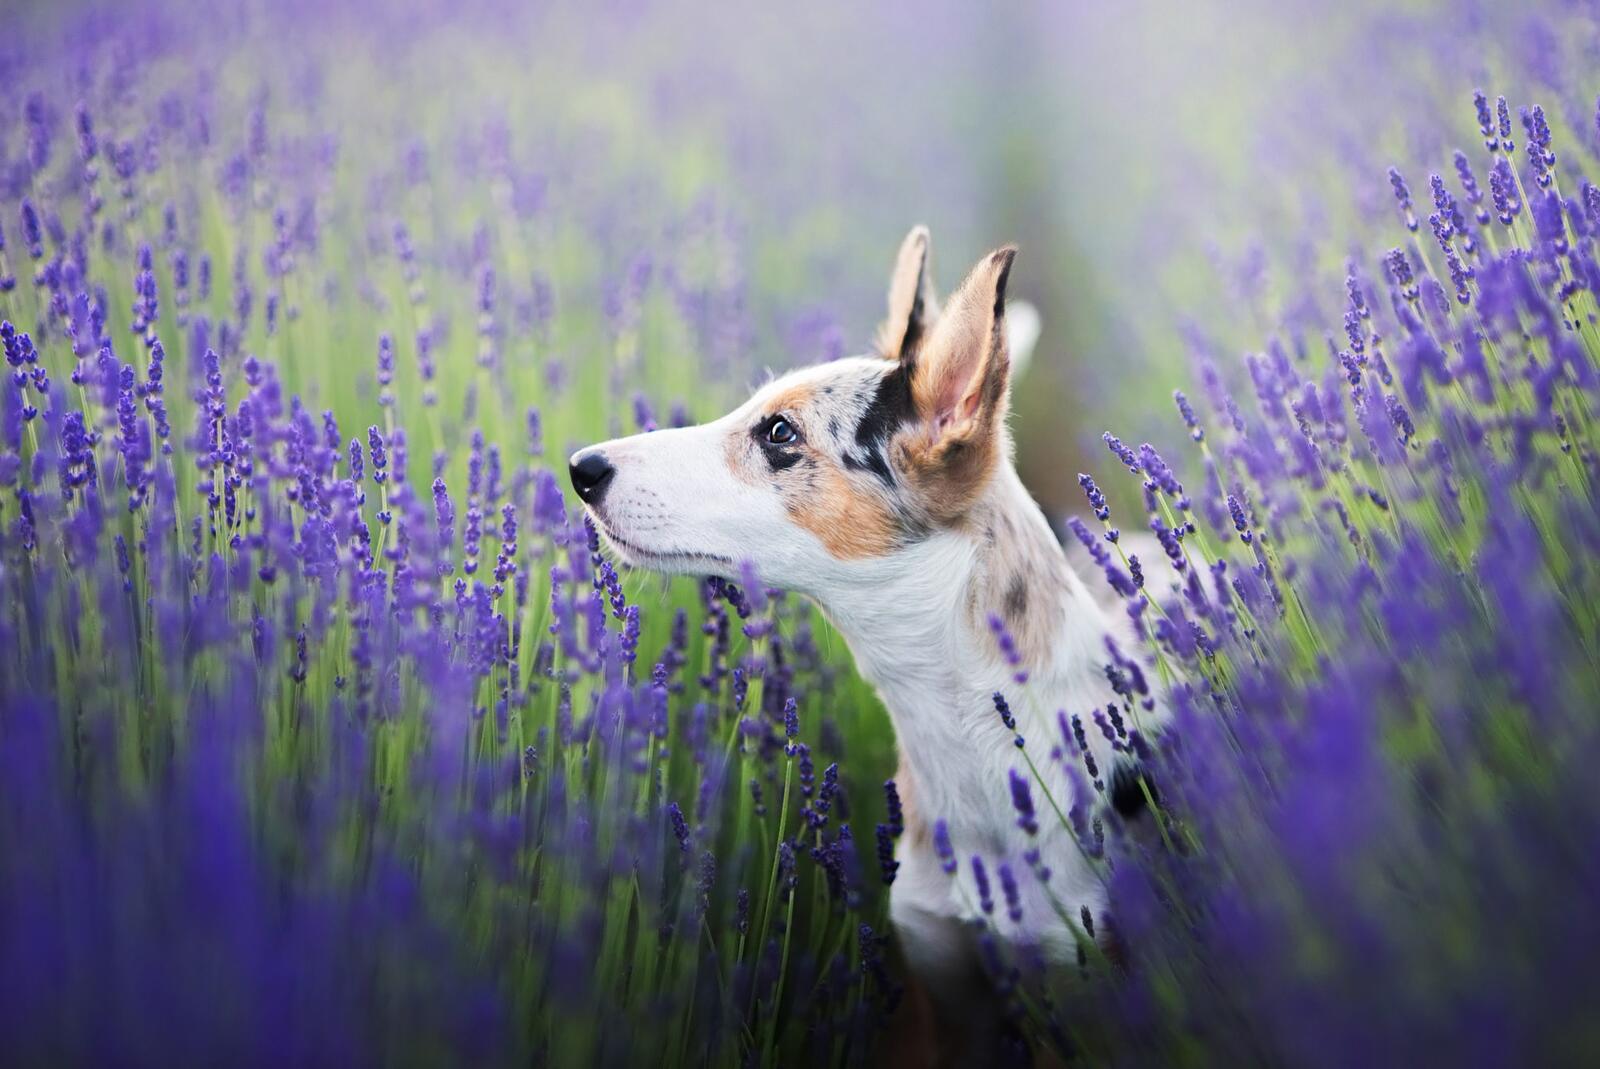 Free photo Spotted puppy in lavender